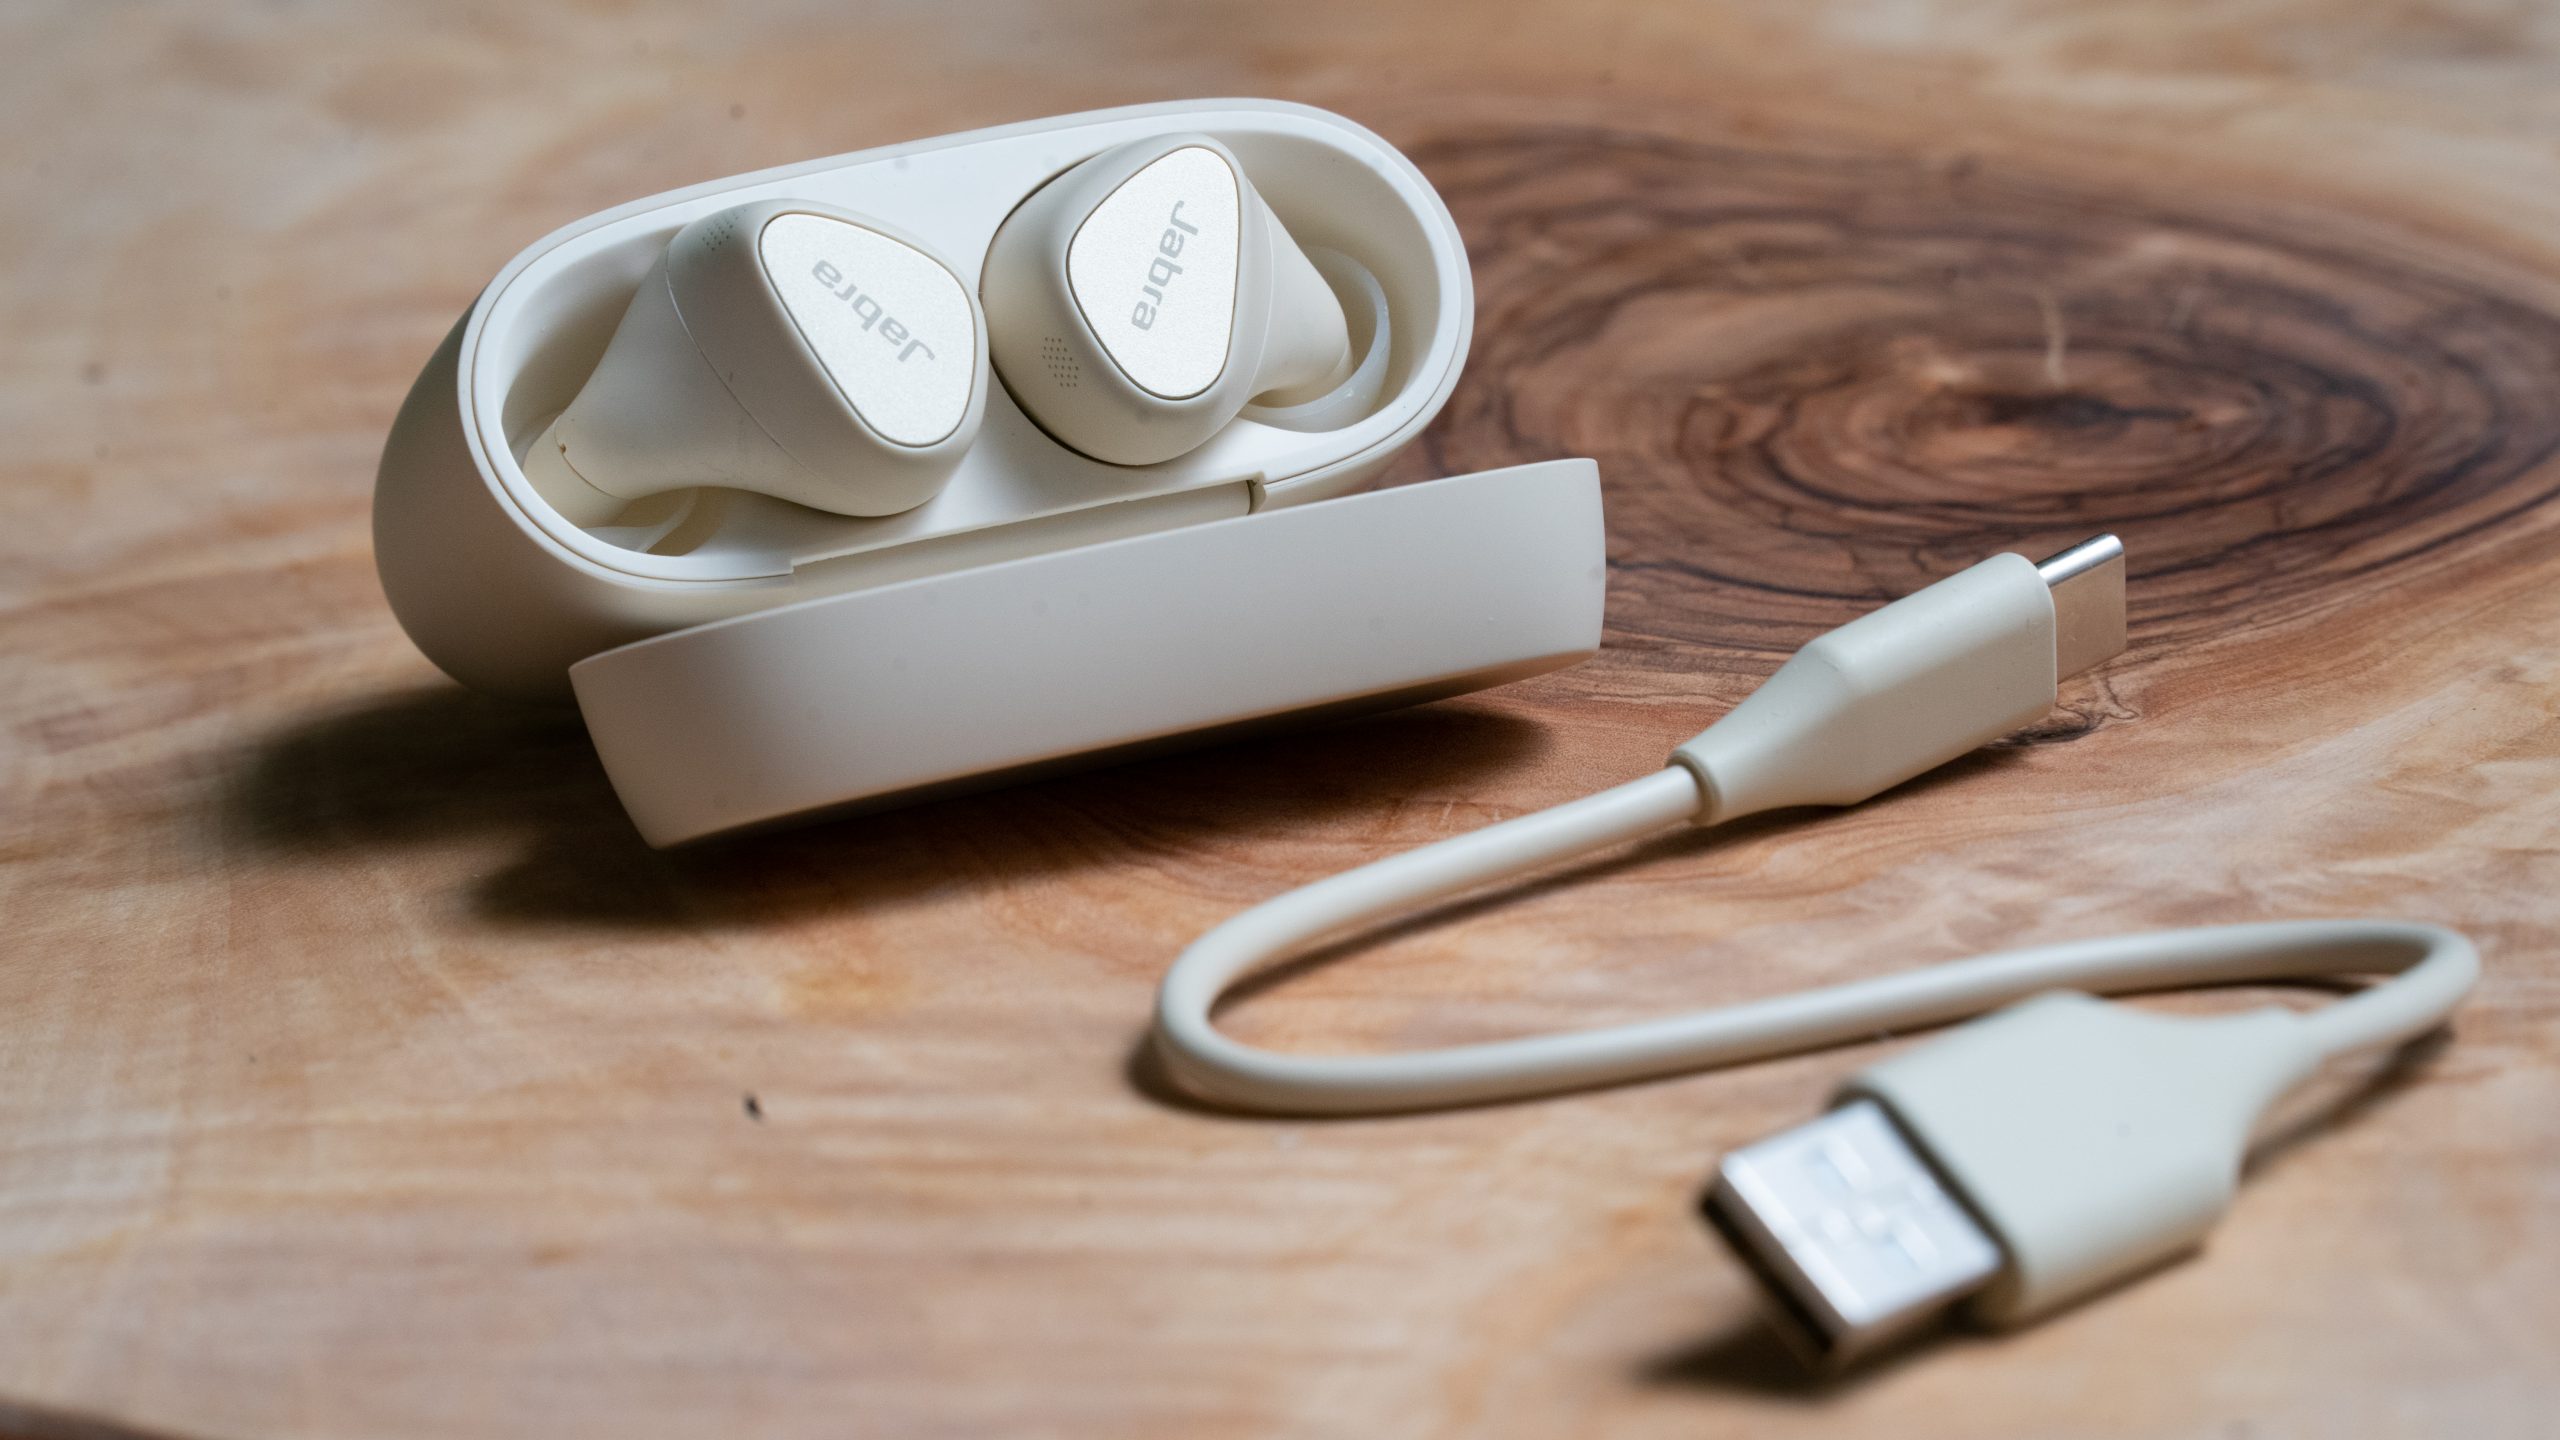 The Jabra Elite 5 true wireless earbuds in white on a wooden surface with the case open.